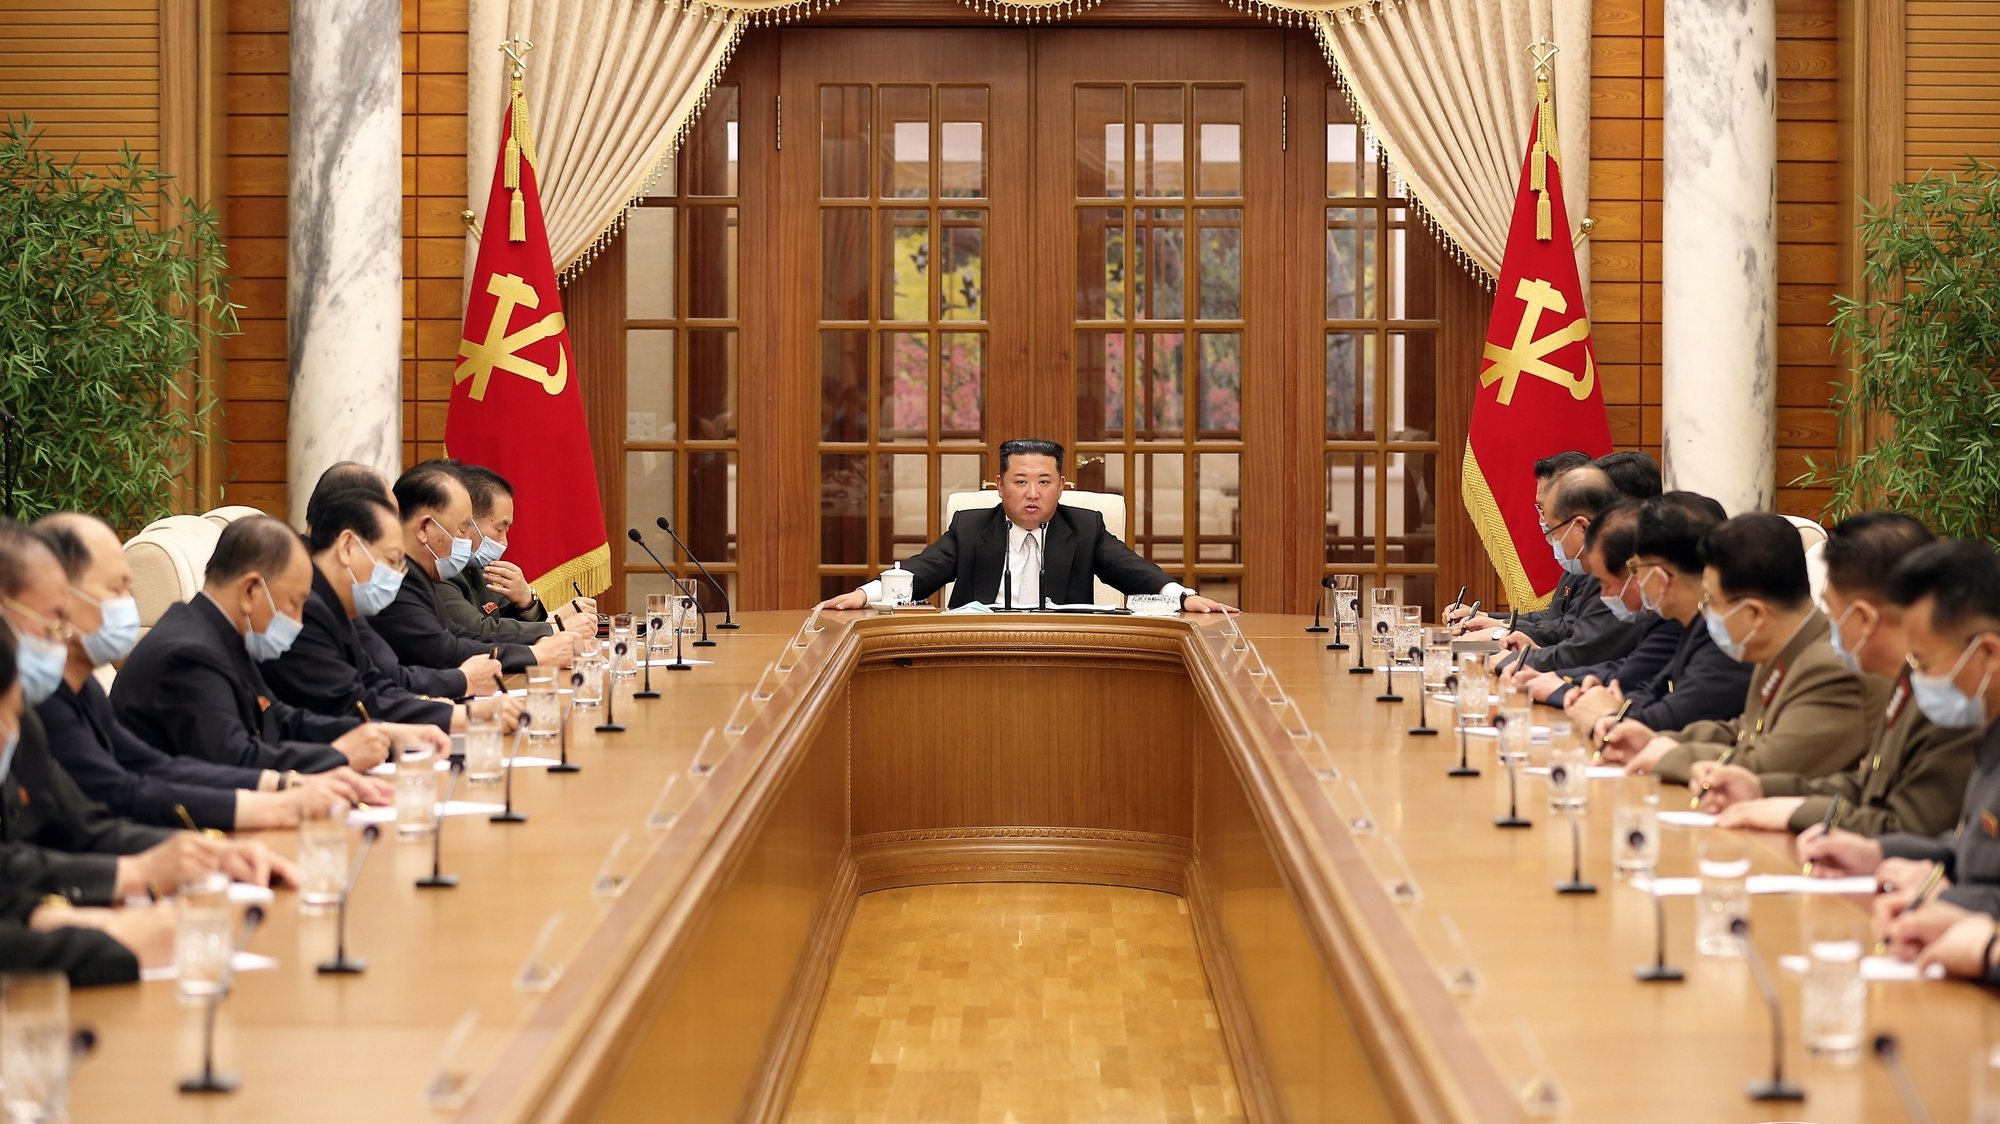 epa09941460 A photo released by the official North Korean Central News Agency (KCNA) shows the meeting of the 8th Political Bureau of 8th Central Committee of the WPK, convened at the office building of the Party Central Committee in Pyongyang, North Korea, 12 May 2022. Kim Jong-un (C), general secretary of the Workers&#039; Party of Korea (WPK), presented at the meeting, held to organize the government&#039;s response to an outbreak of COVID-19 in Pyongyang.  EPA/KCNA   EDITORIAL USE ONLY